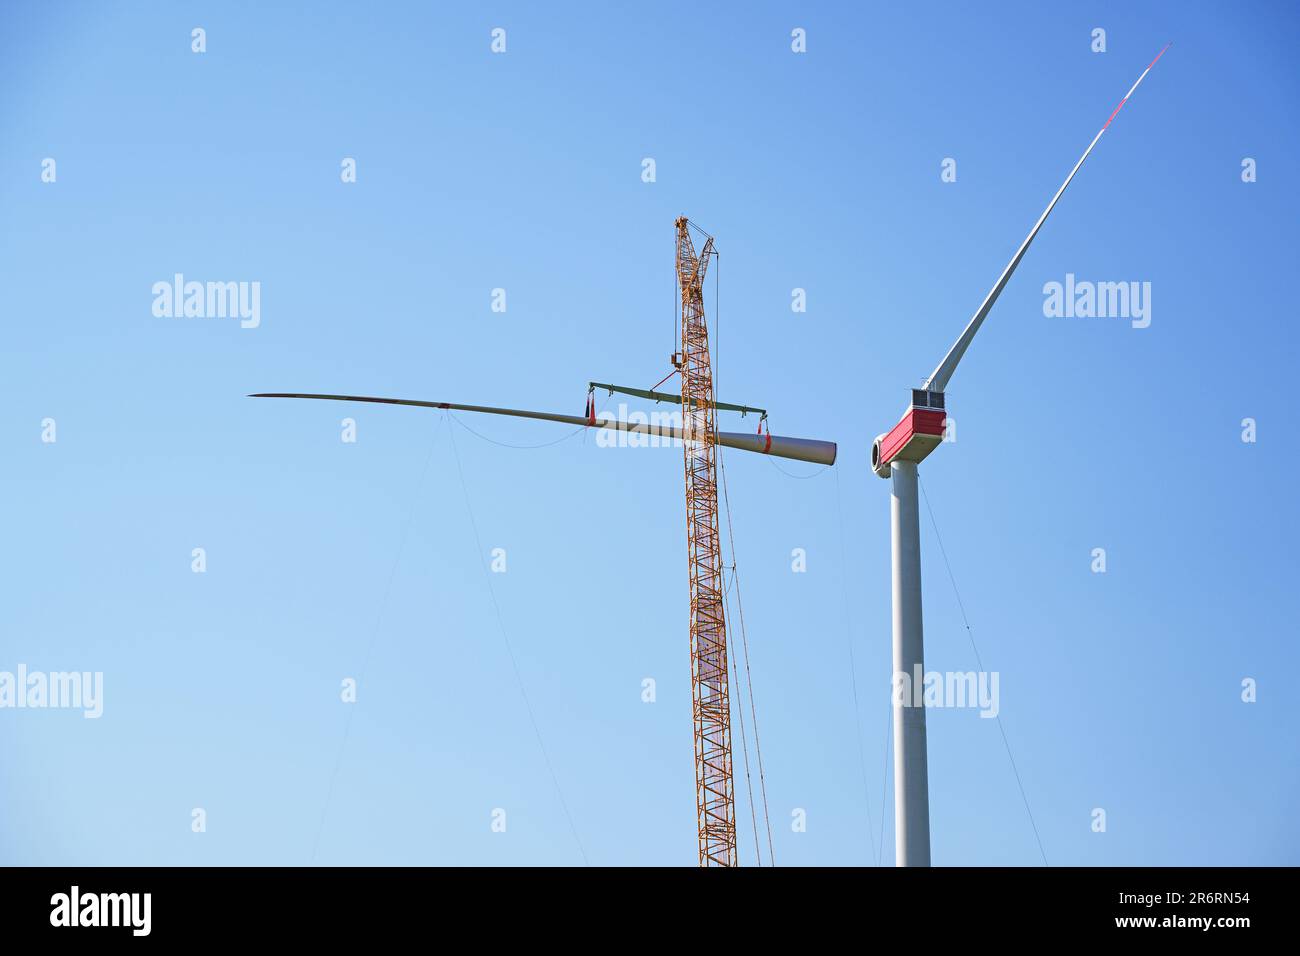 Installing a wind turbine, crane is lifting the second blade to install it to the rotor hub on the tower, heavy industry for electricity, renewable en Stock Photo